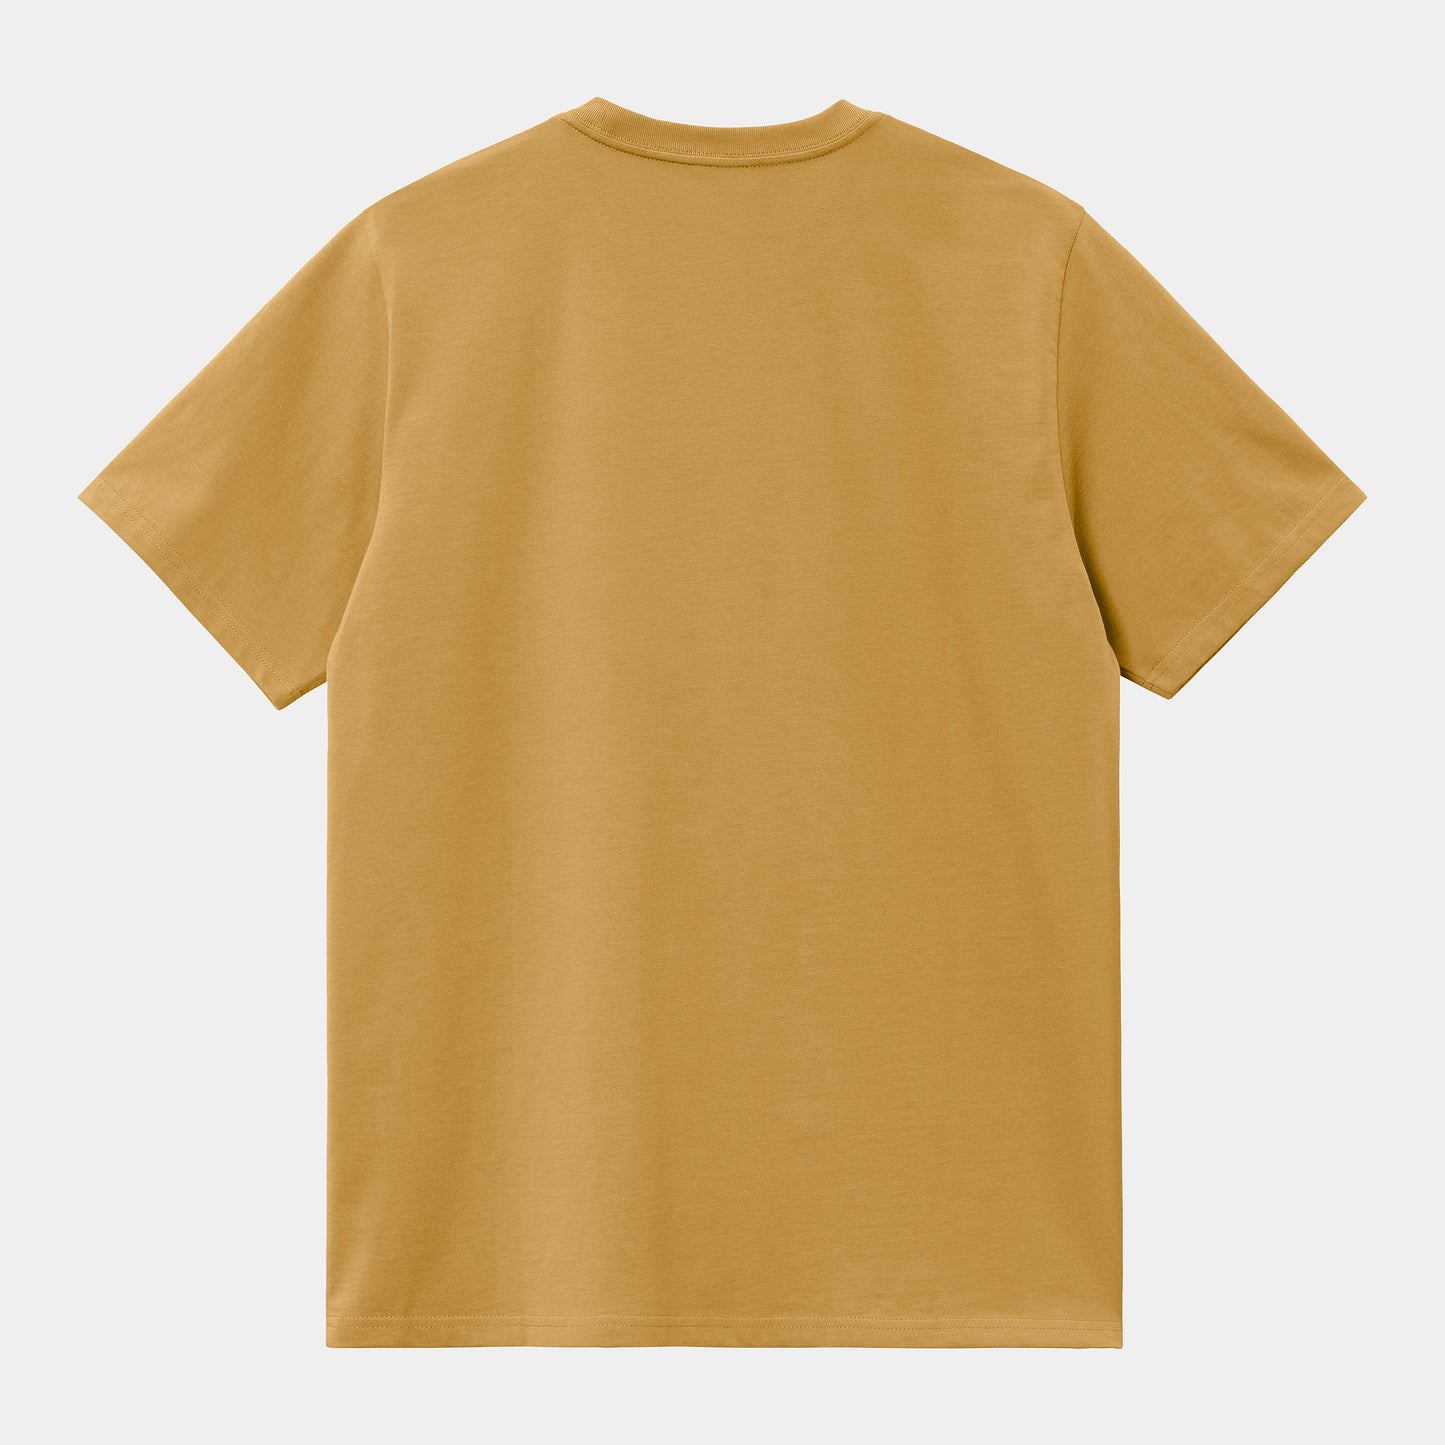 CARHARTT WIP S/S CHASE T-Shirt - Sunray Gold